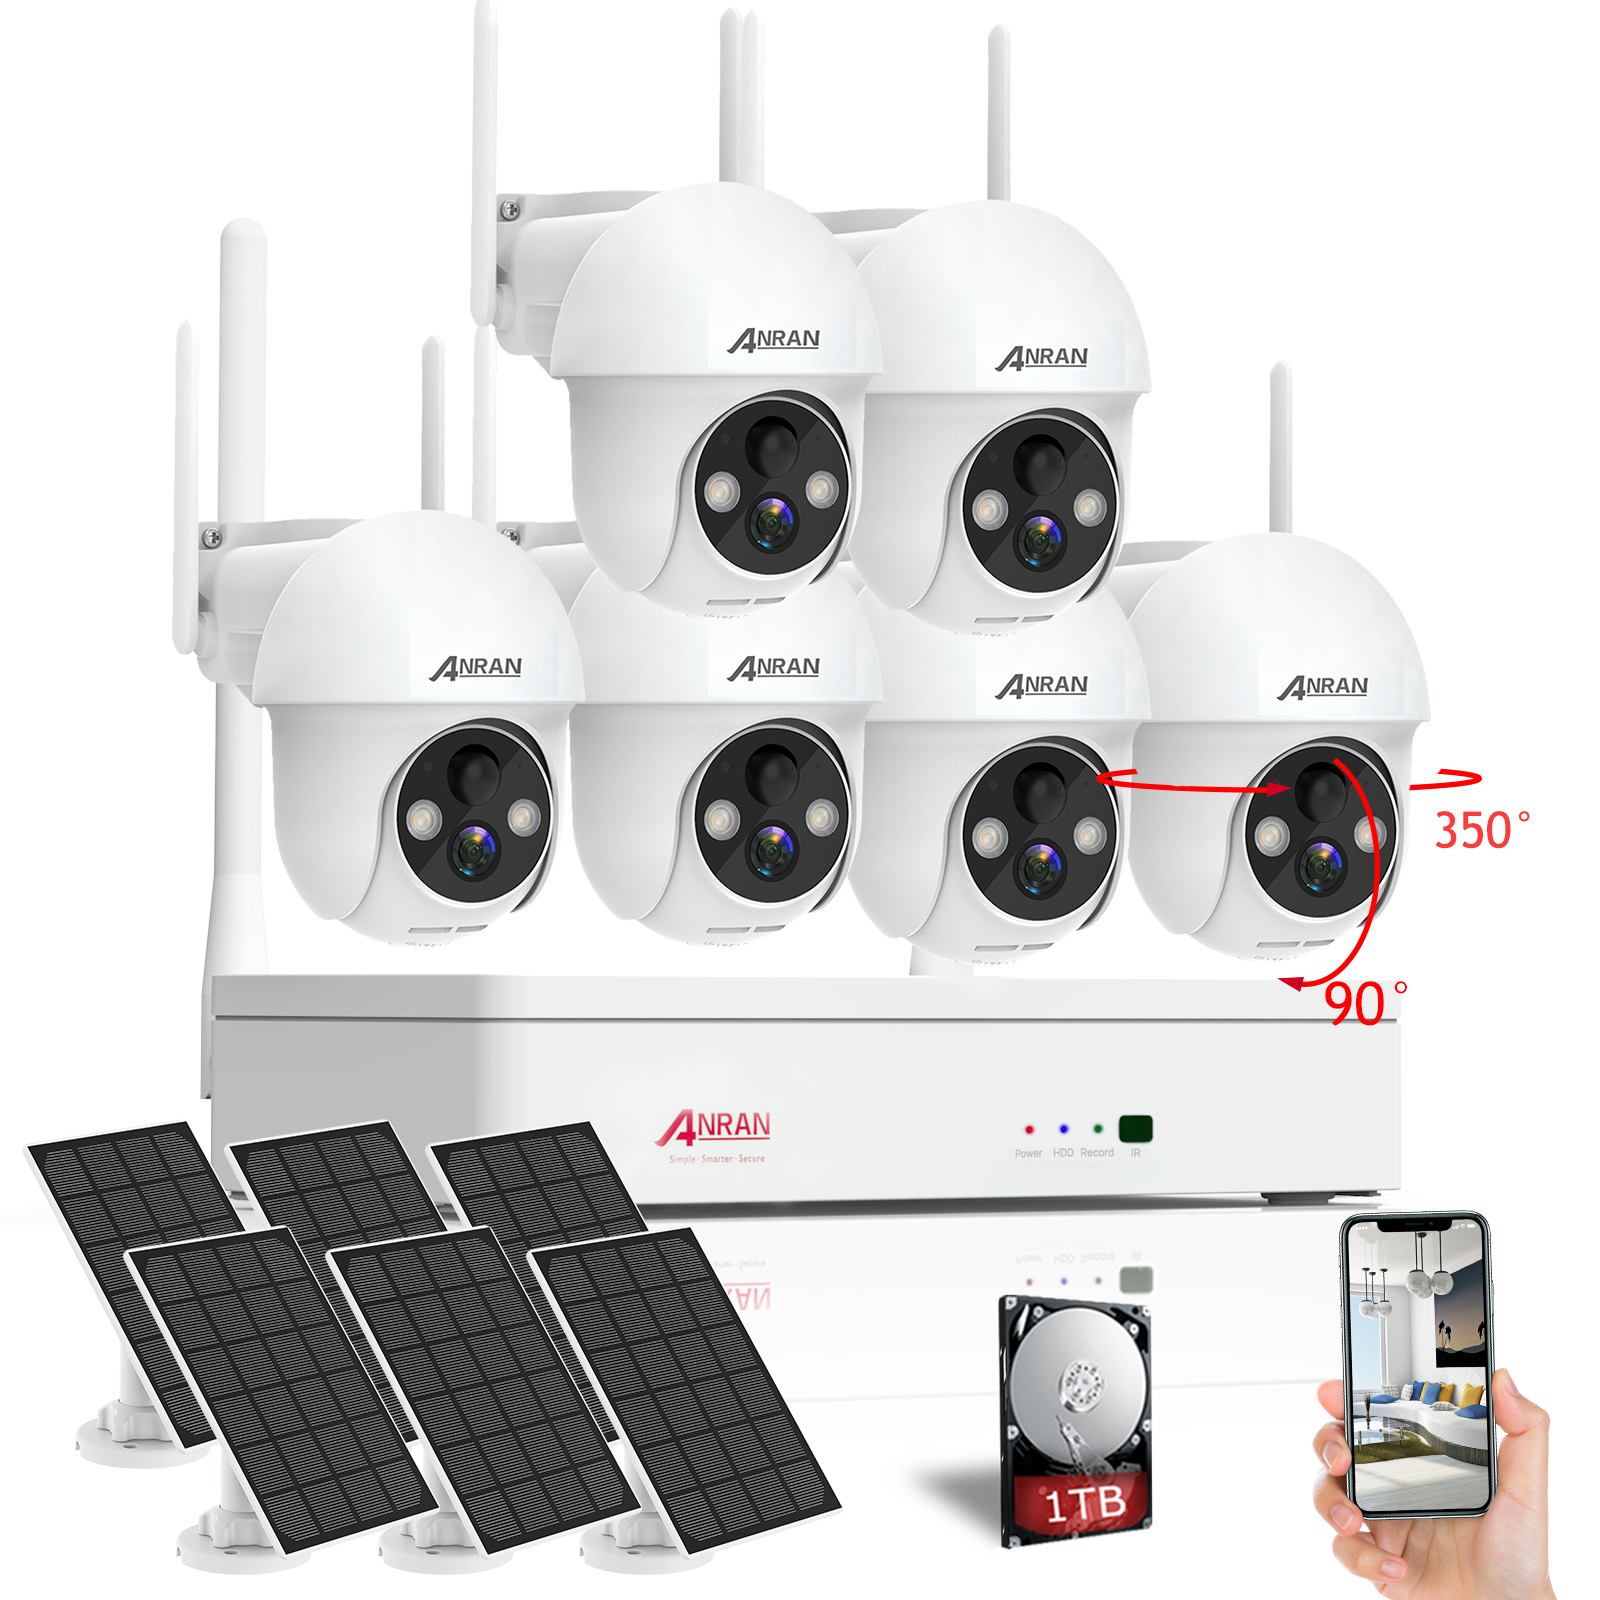 ANRAN 8 Channel NVR Security Camera System Solar Battery Wirelees 2K Outdoor 2Way Audio 1TB 360° PTZ with 6Pcs Cameras and 1TB HDD-ANRAN